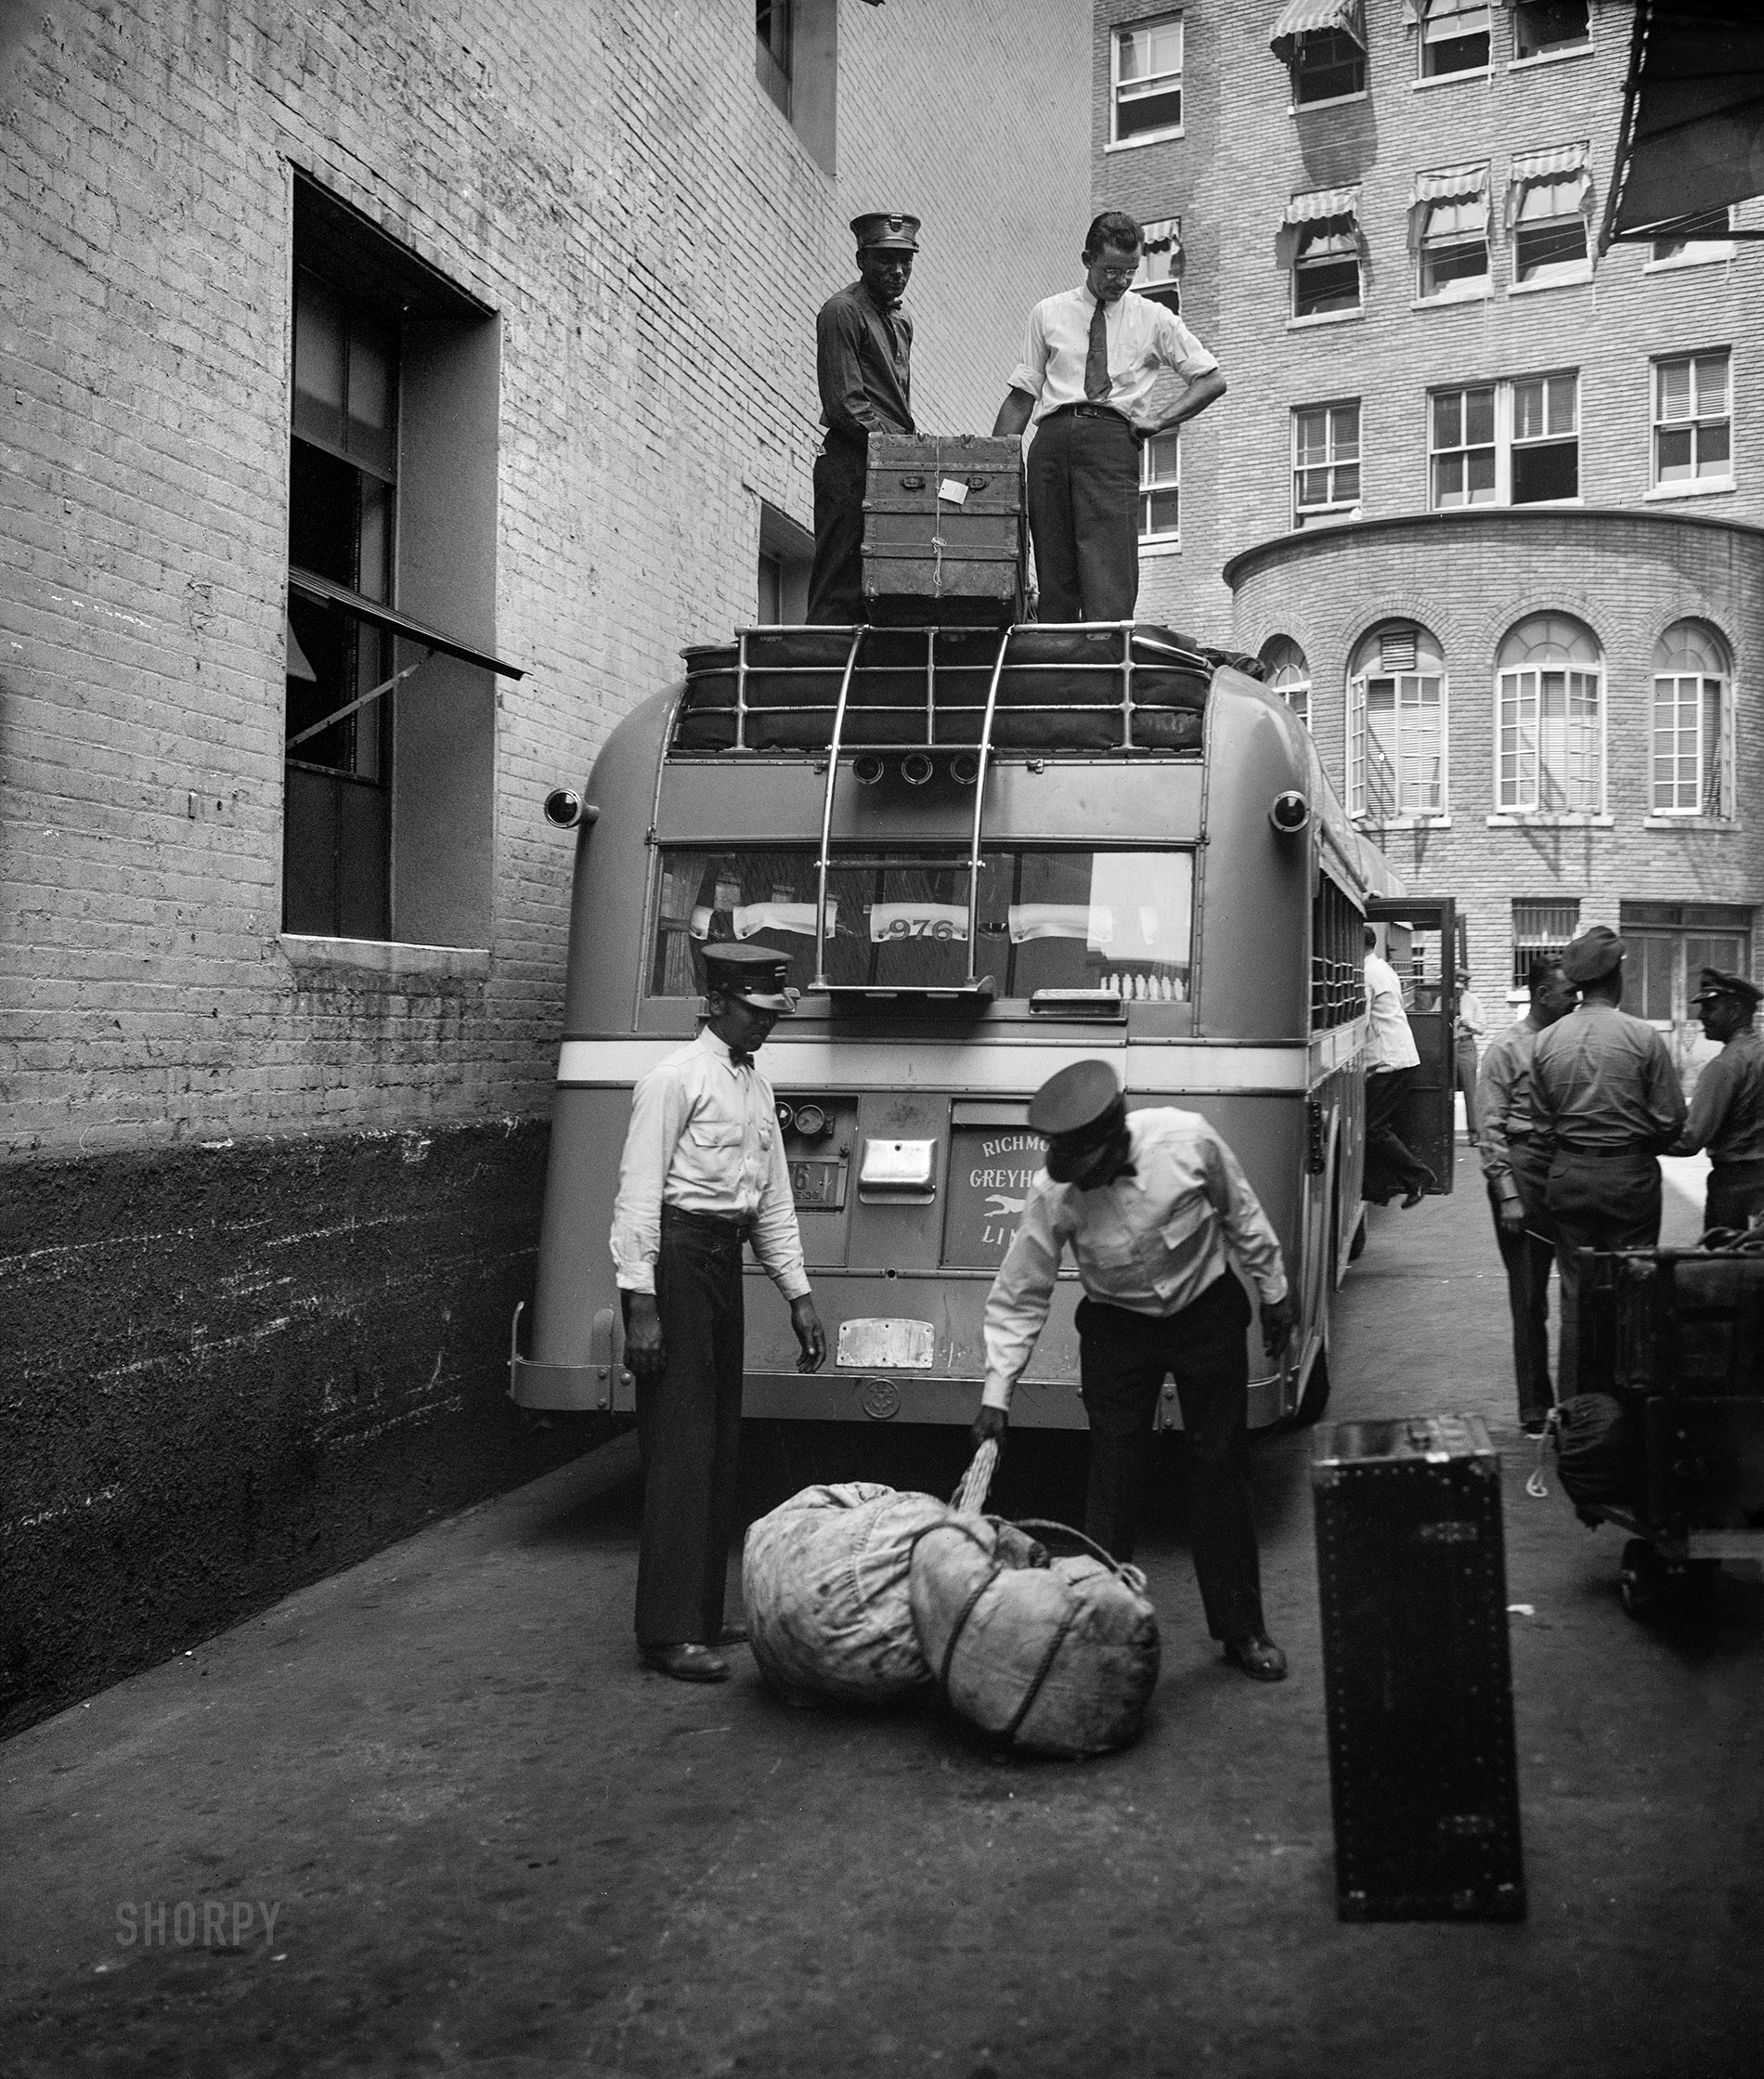 Washington, D.C., 1936. "Bus transportation -- loading baggage on motor coach." 4x5 inch glass negative, Harris & Ewing Collection. View full size.